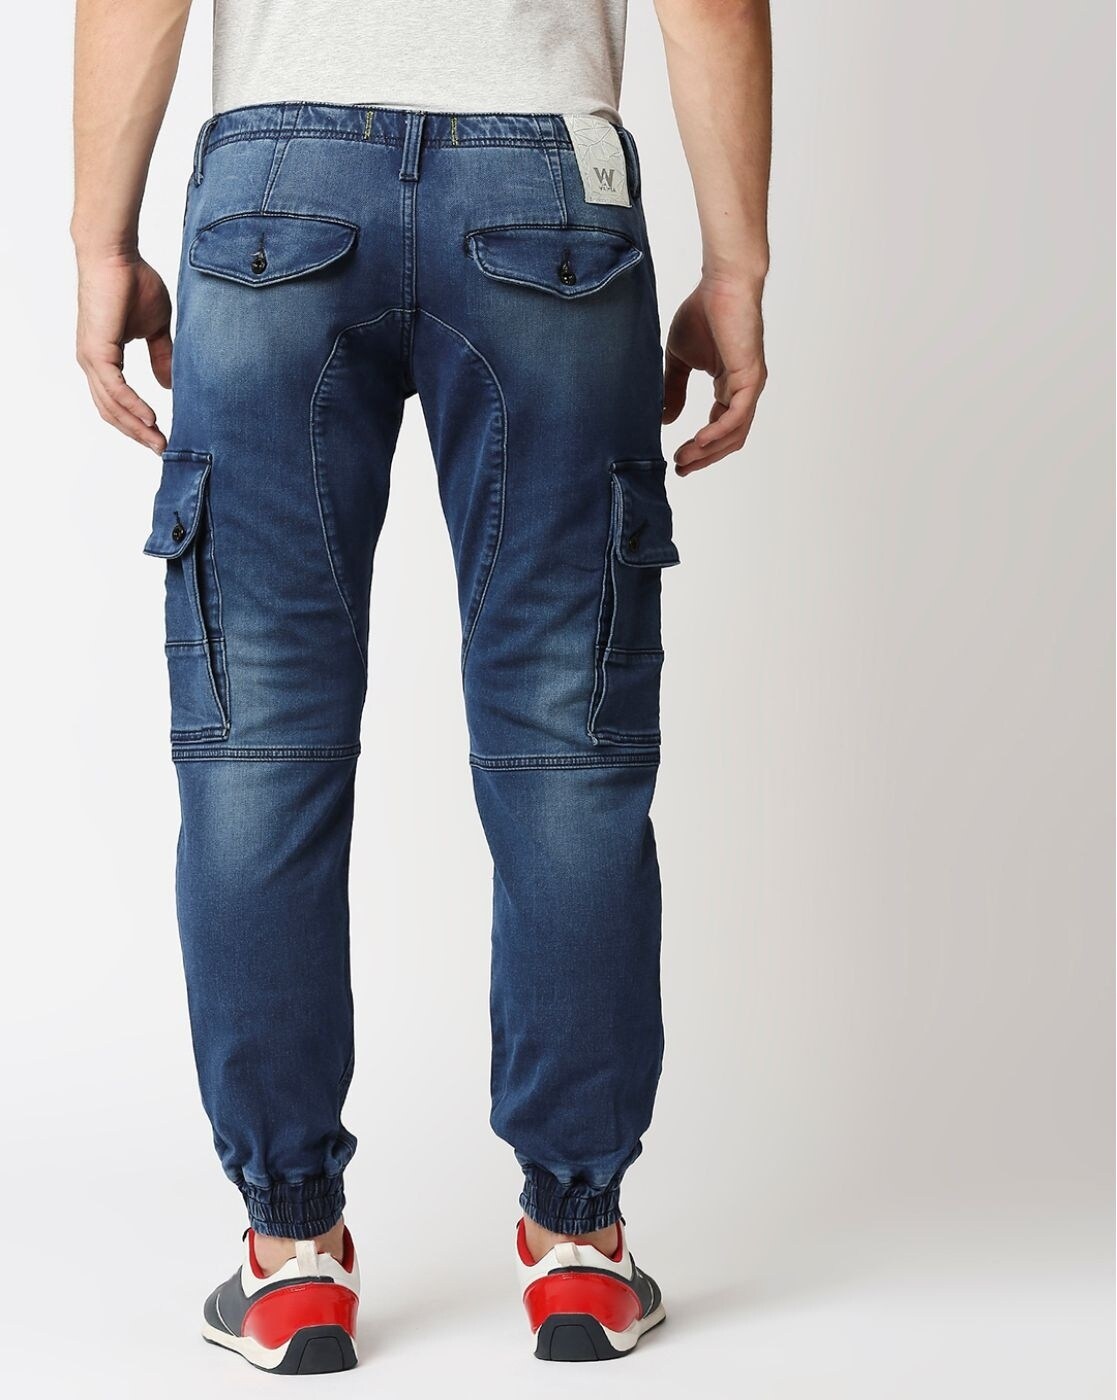 Buy online Blue Denim Joggers With Knee Pocket from Bottom Wear for Men by  Ivoc for ₹729 at 59% off